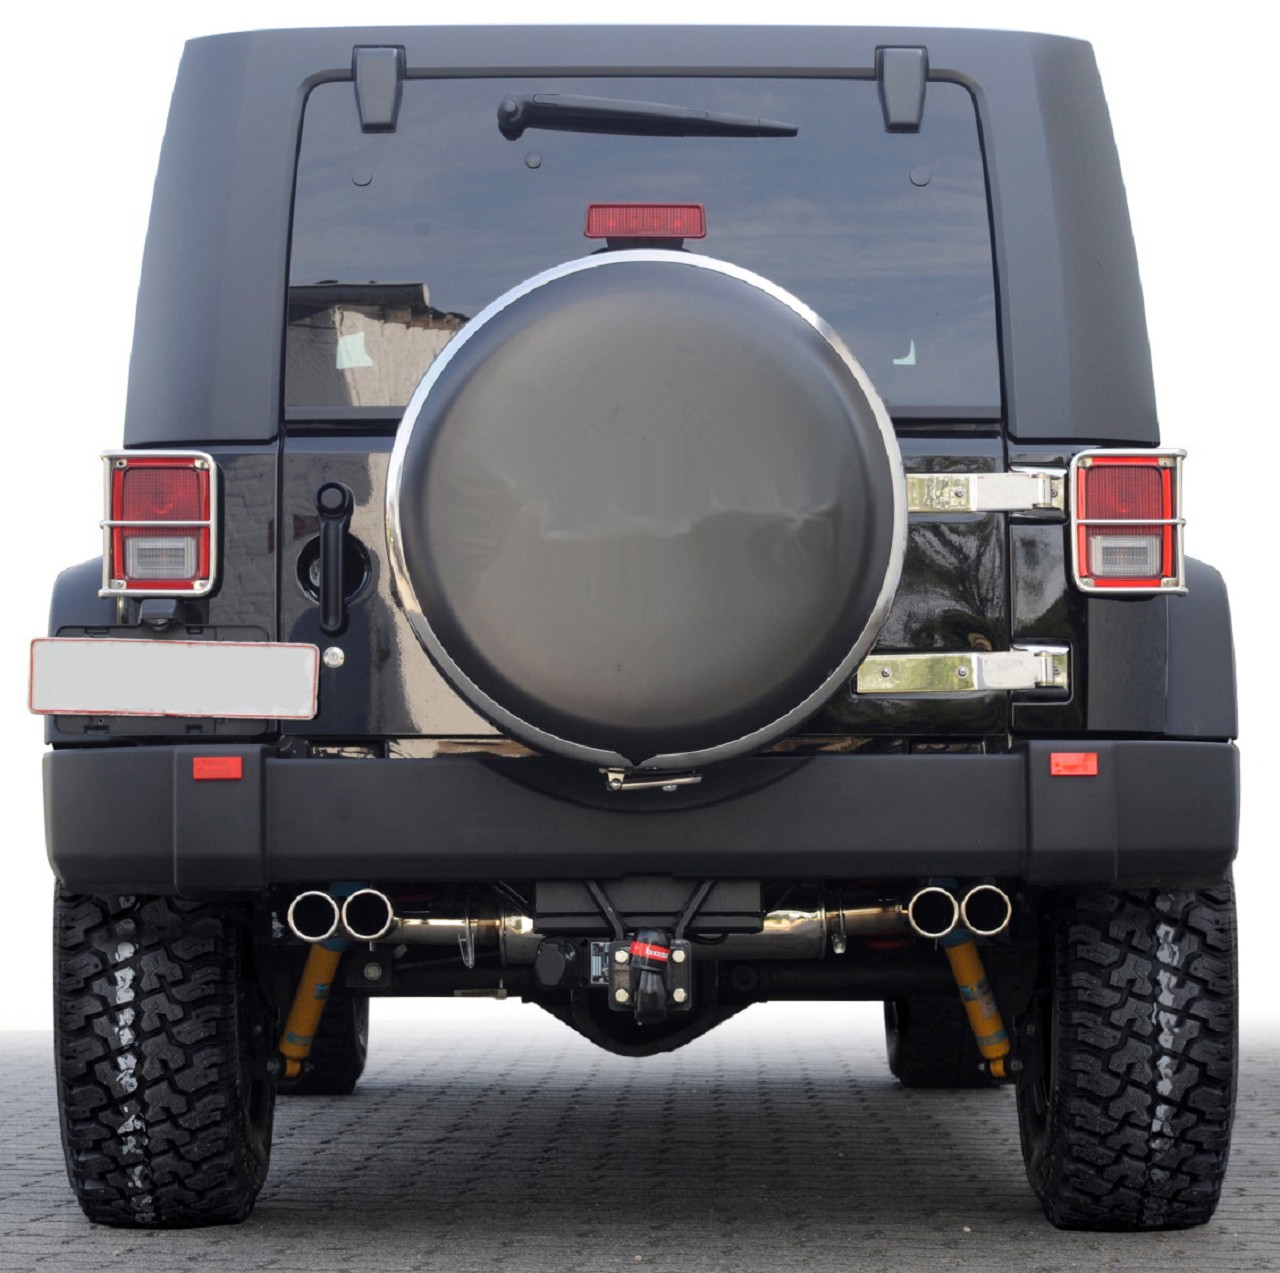 Tire cover stainless steel suitable for tire size 275/70R16 and 275/65R17